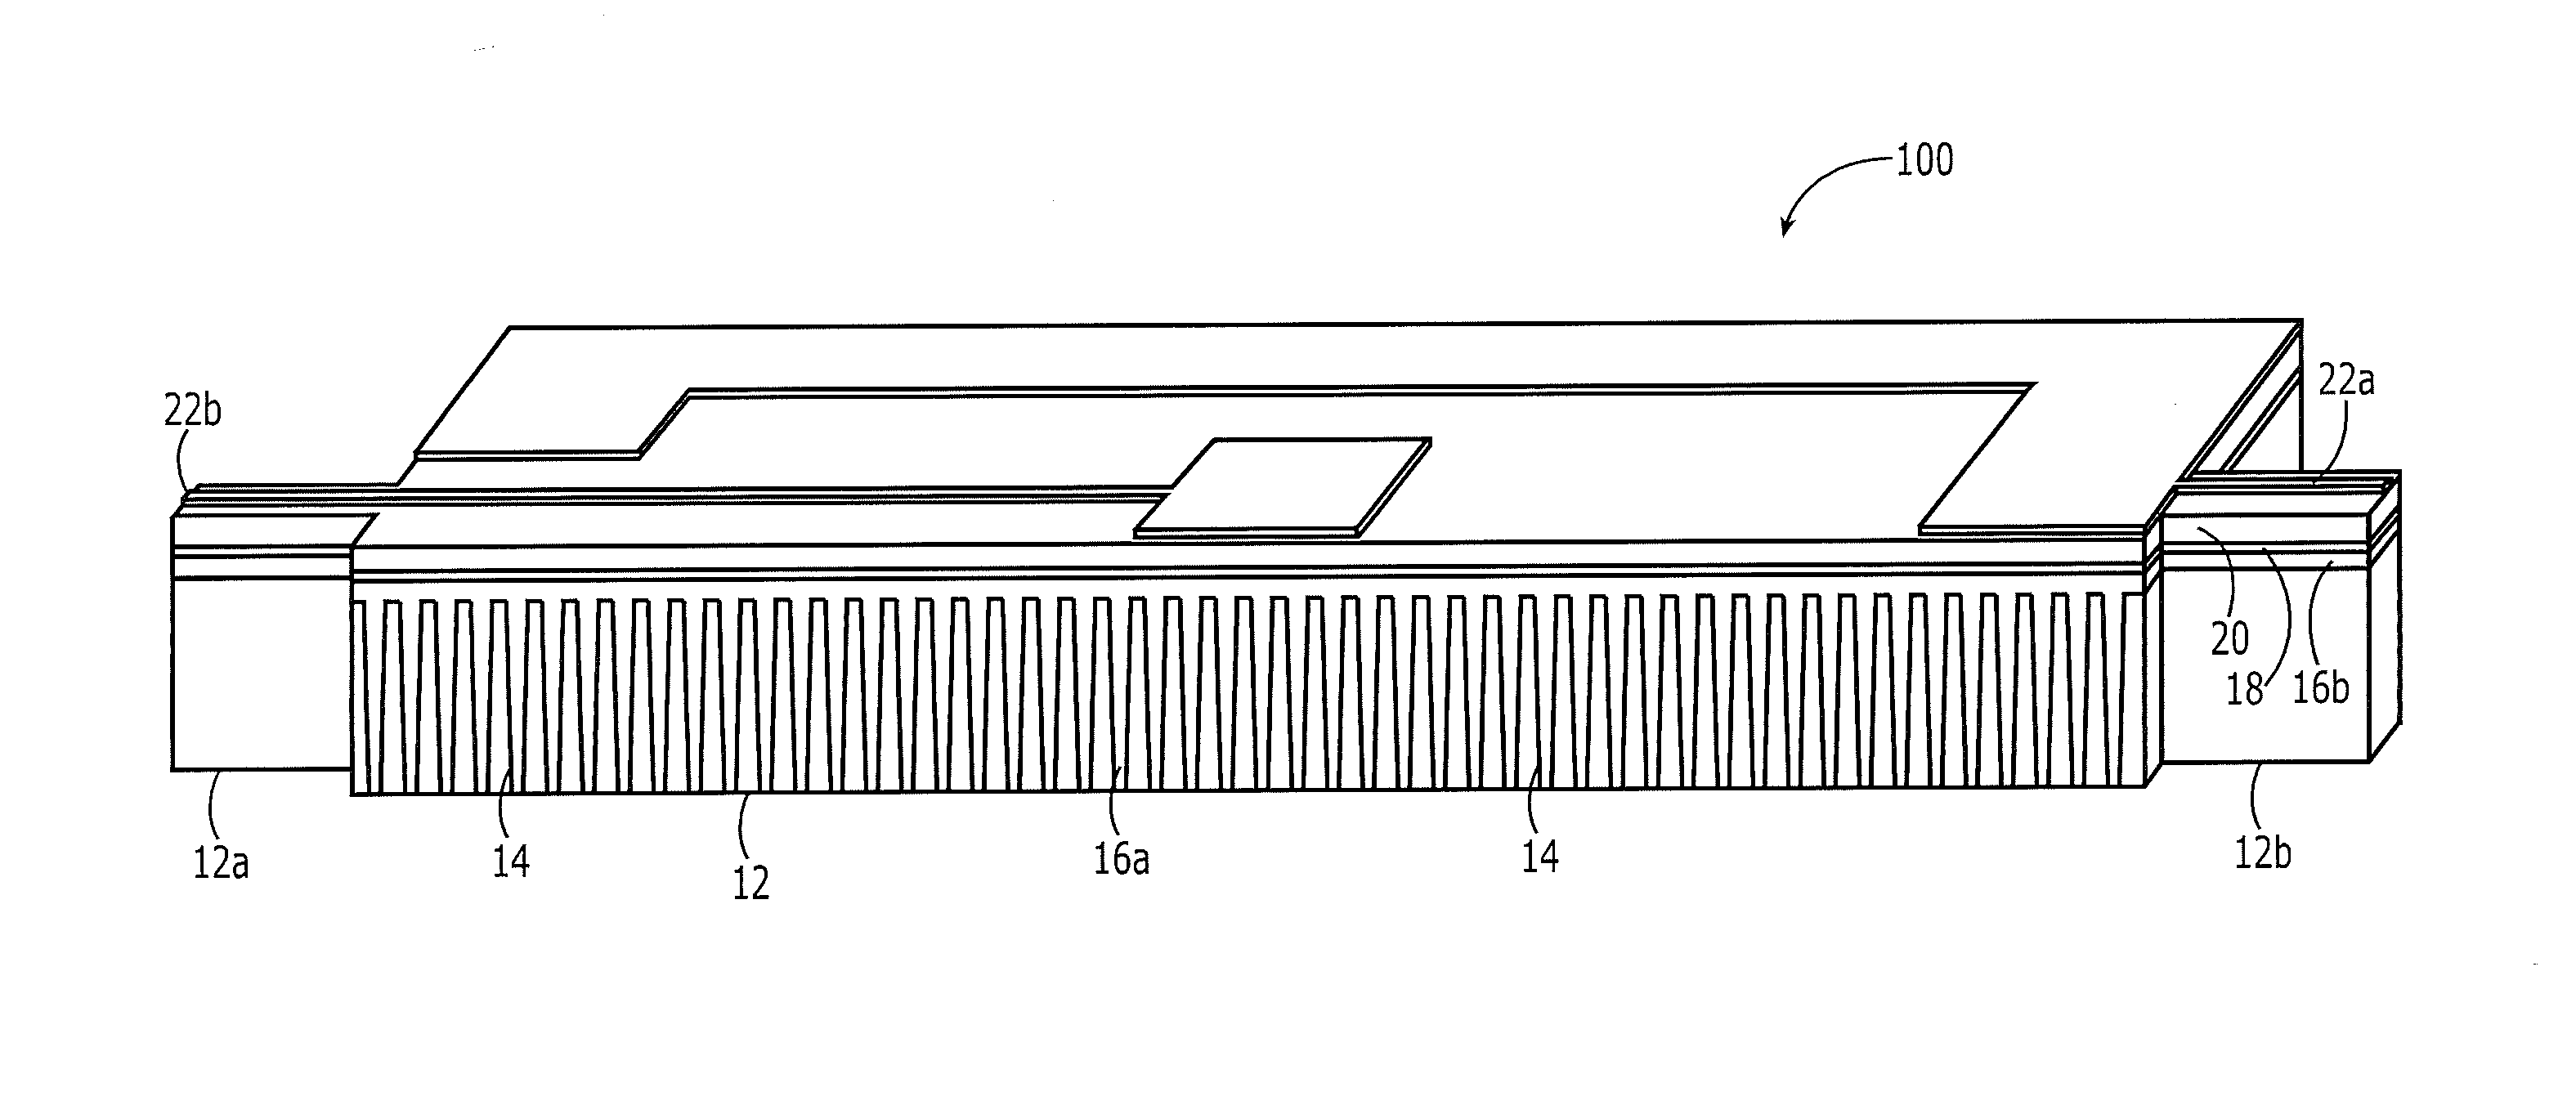 Methods of Forming Micromechanical Resonators Having High Density Trench Arrays Therein that Provide Passive Temperature Compensation